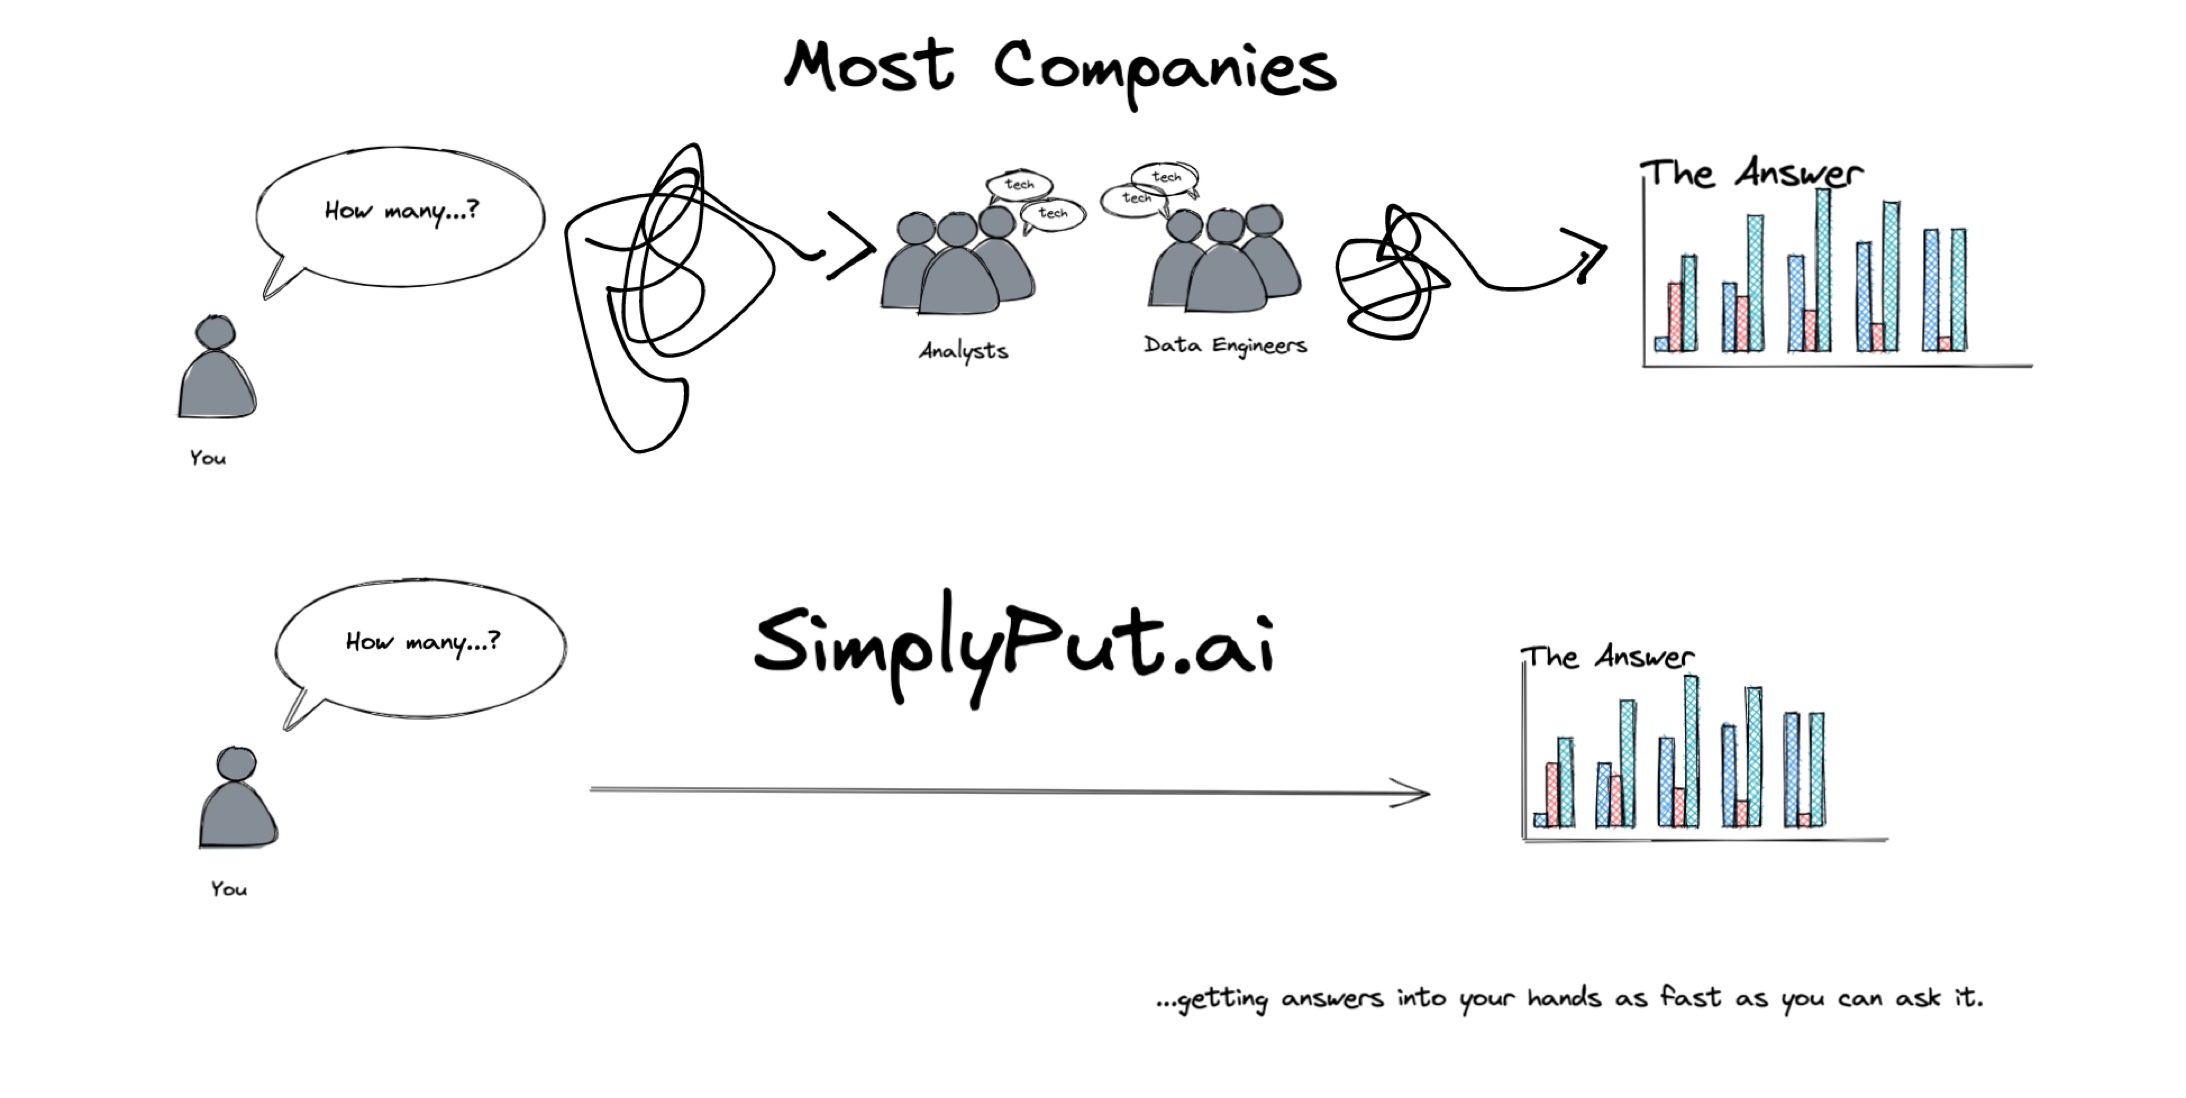 An infographic illustrating two different approaches to data analysis. The top half, labeled 'Most Companies,' shows a figure labeled 'You' with a speech bubble 'How many...?', leading to a convoluted path through groups labeled 'Analysts' and 'Data Engineers' before arriving at a bar chart titled 'The Answer.' The bottom half, labeled 'SimplyPut.ai,' shows the same initial figure and speech bubble with a direct line to the same bar chart. Text at the bottom reads '...getting answers into your hands as fast as you can ask it.